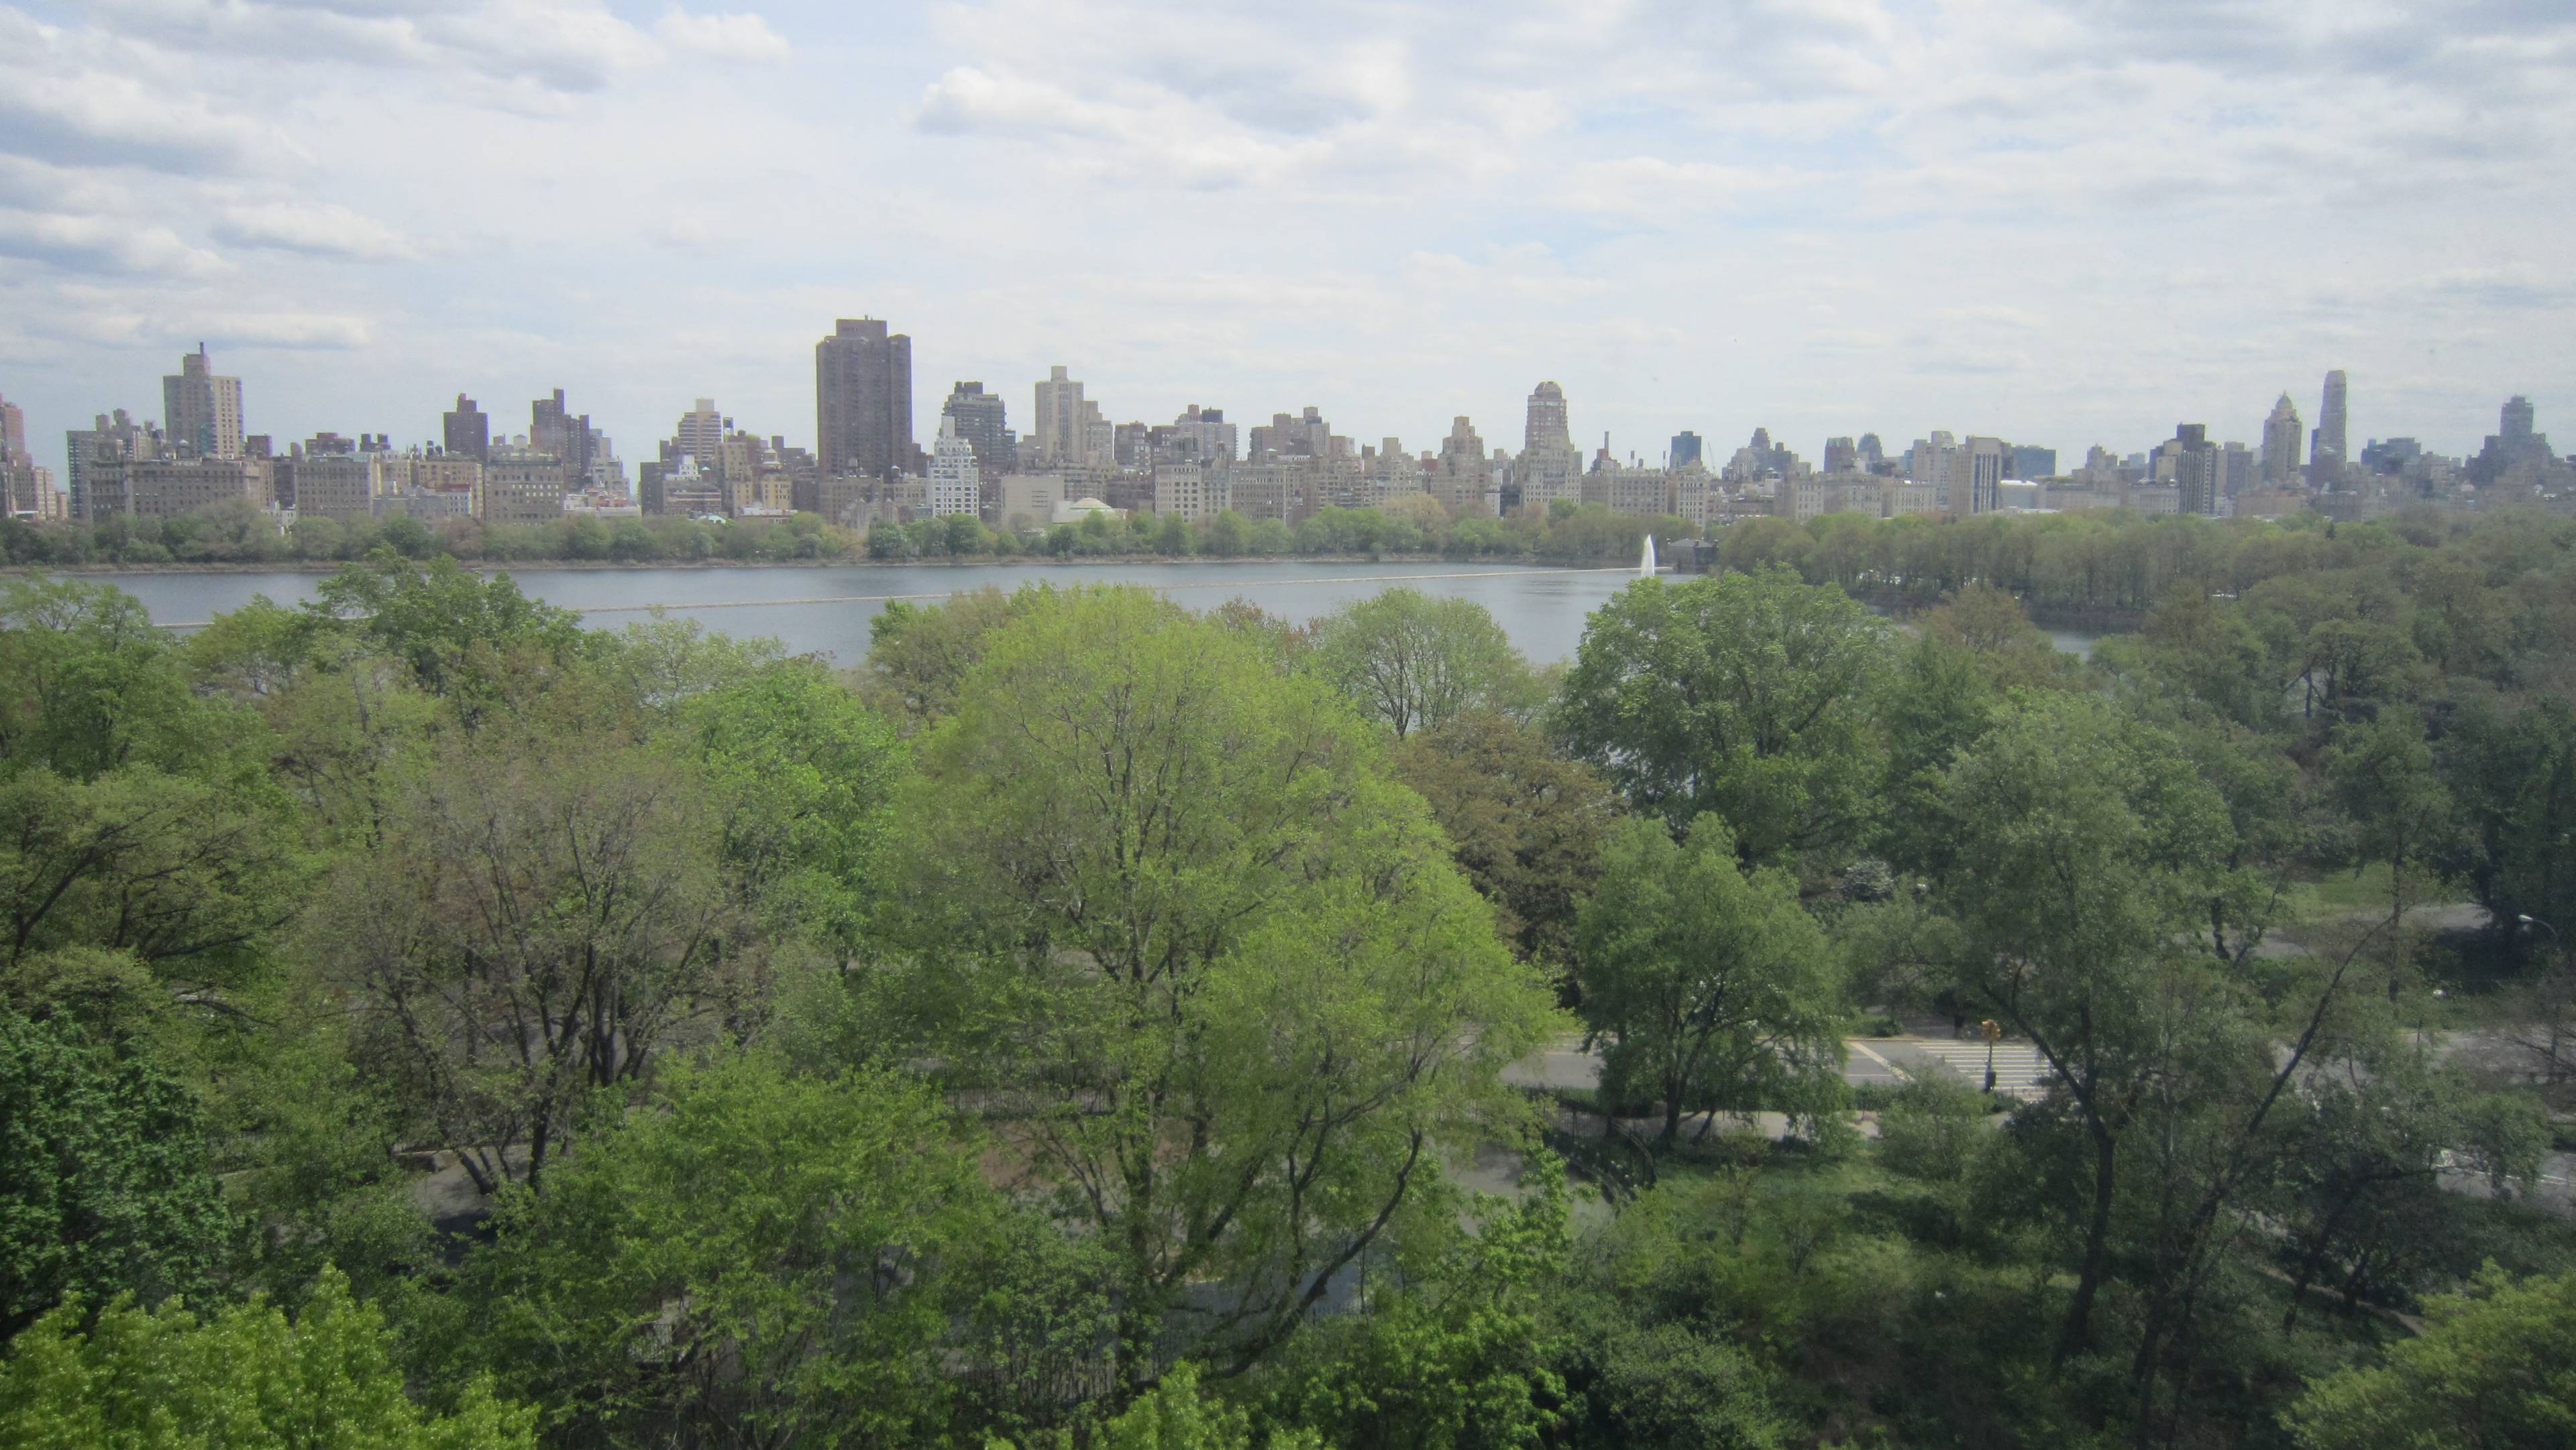 4 BR 3 BA W/D Central Park Direct view of 2700 SF NEW Renovated Best Upper West Side Lincoln Center